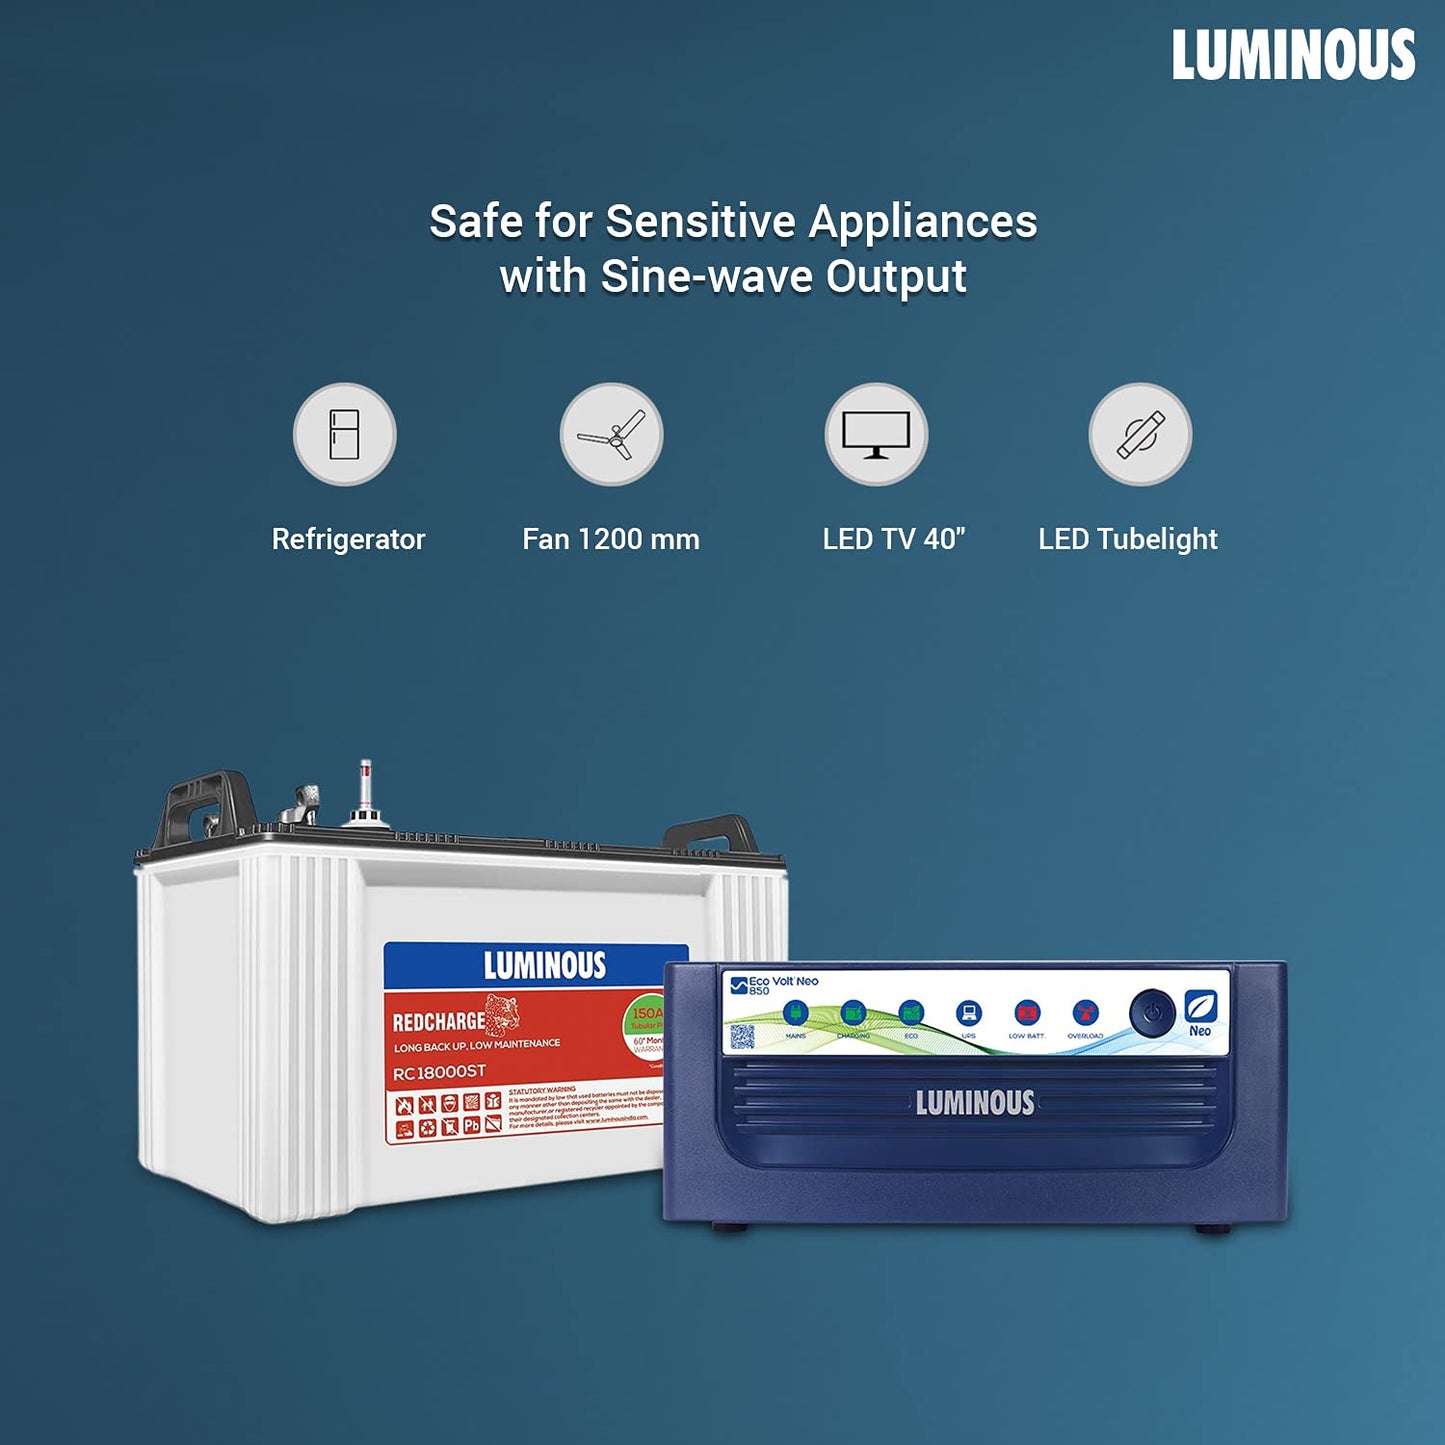 Luminous Eco Volt+ 850 SW Inverter with RC18000ST 150 Ah Battery Combo 1BHK